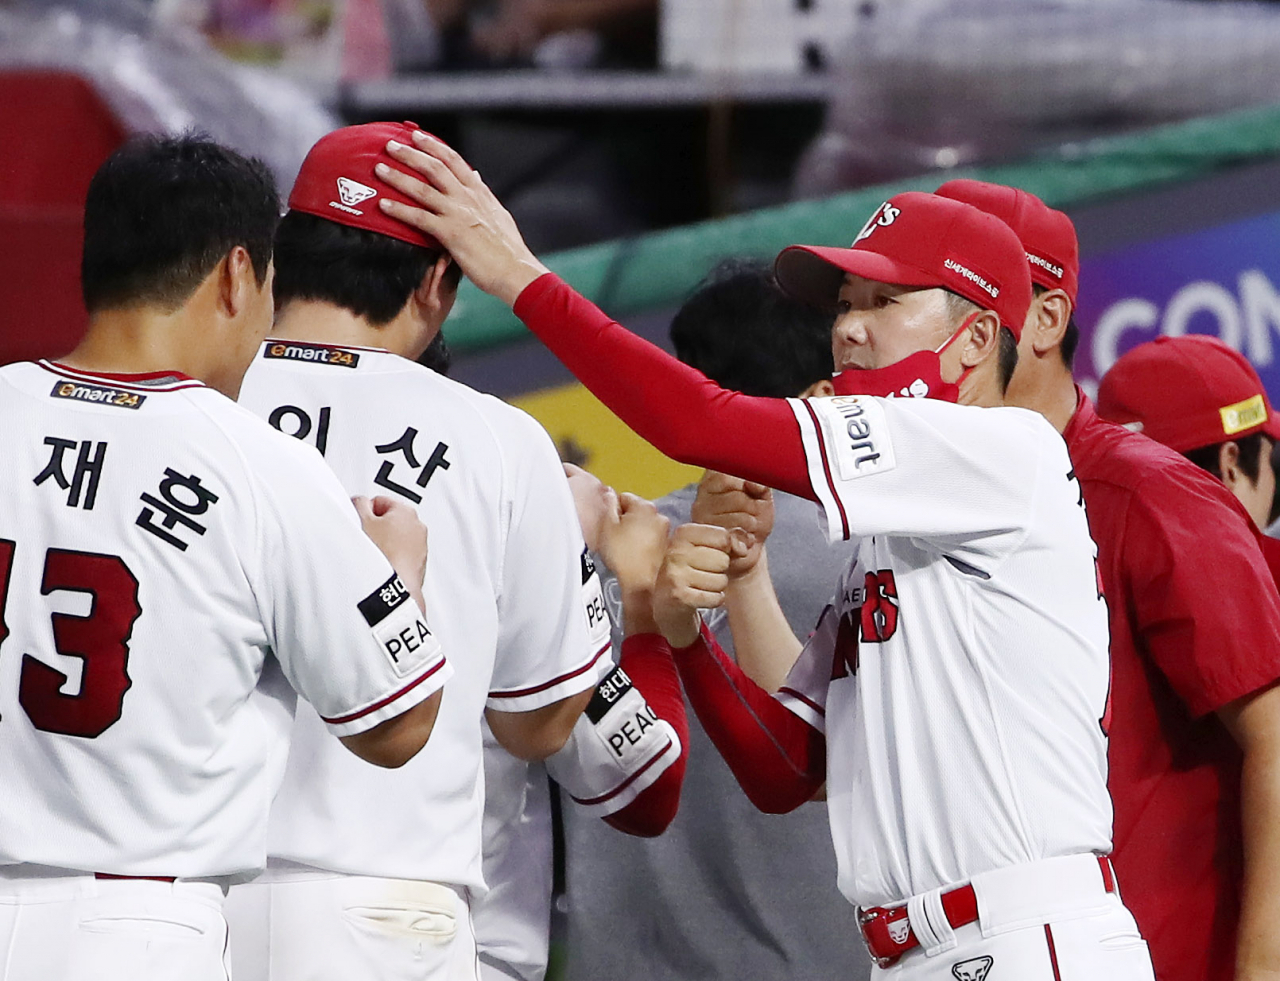 SSG Landers manager Kim Won-hyong (R) congratulates his players after their 4-2 win over the KT Wiz in a Korea Baseball Organization regular season game at Incheon SSG Landers Field in Incheon, 30 kilometers west of Seoul, last Thursday. (Yonhap)